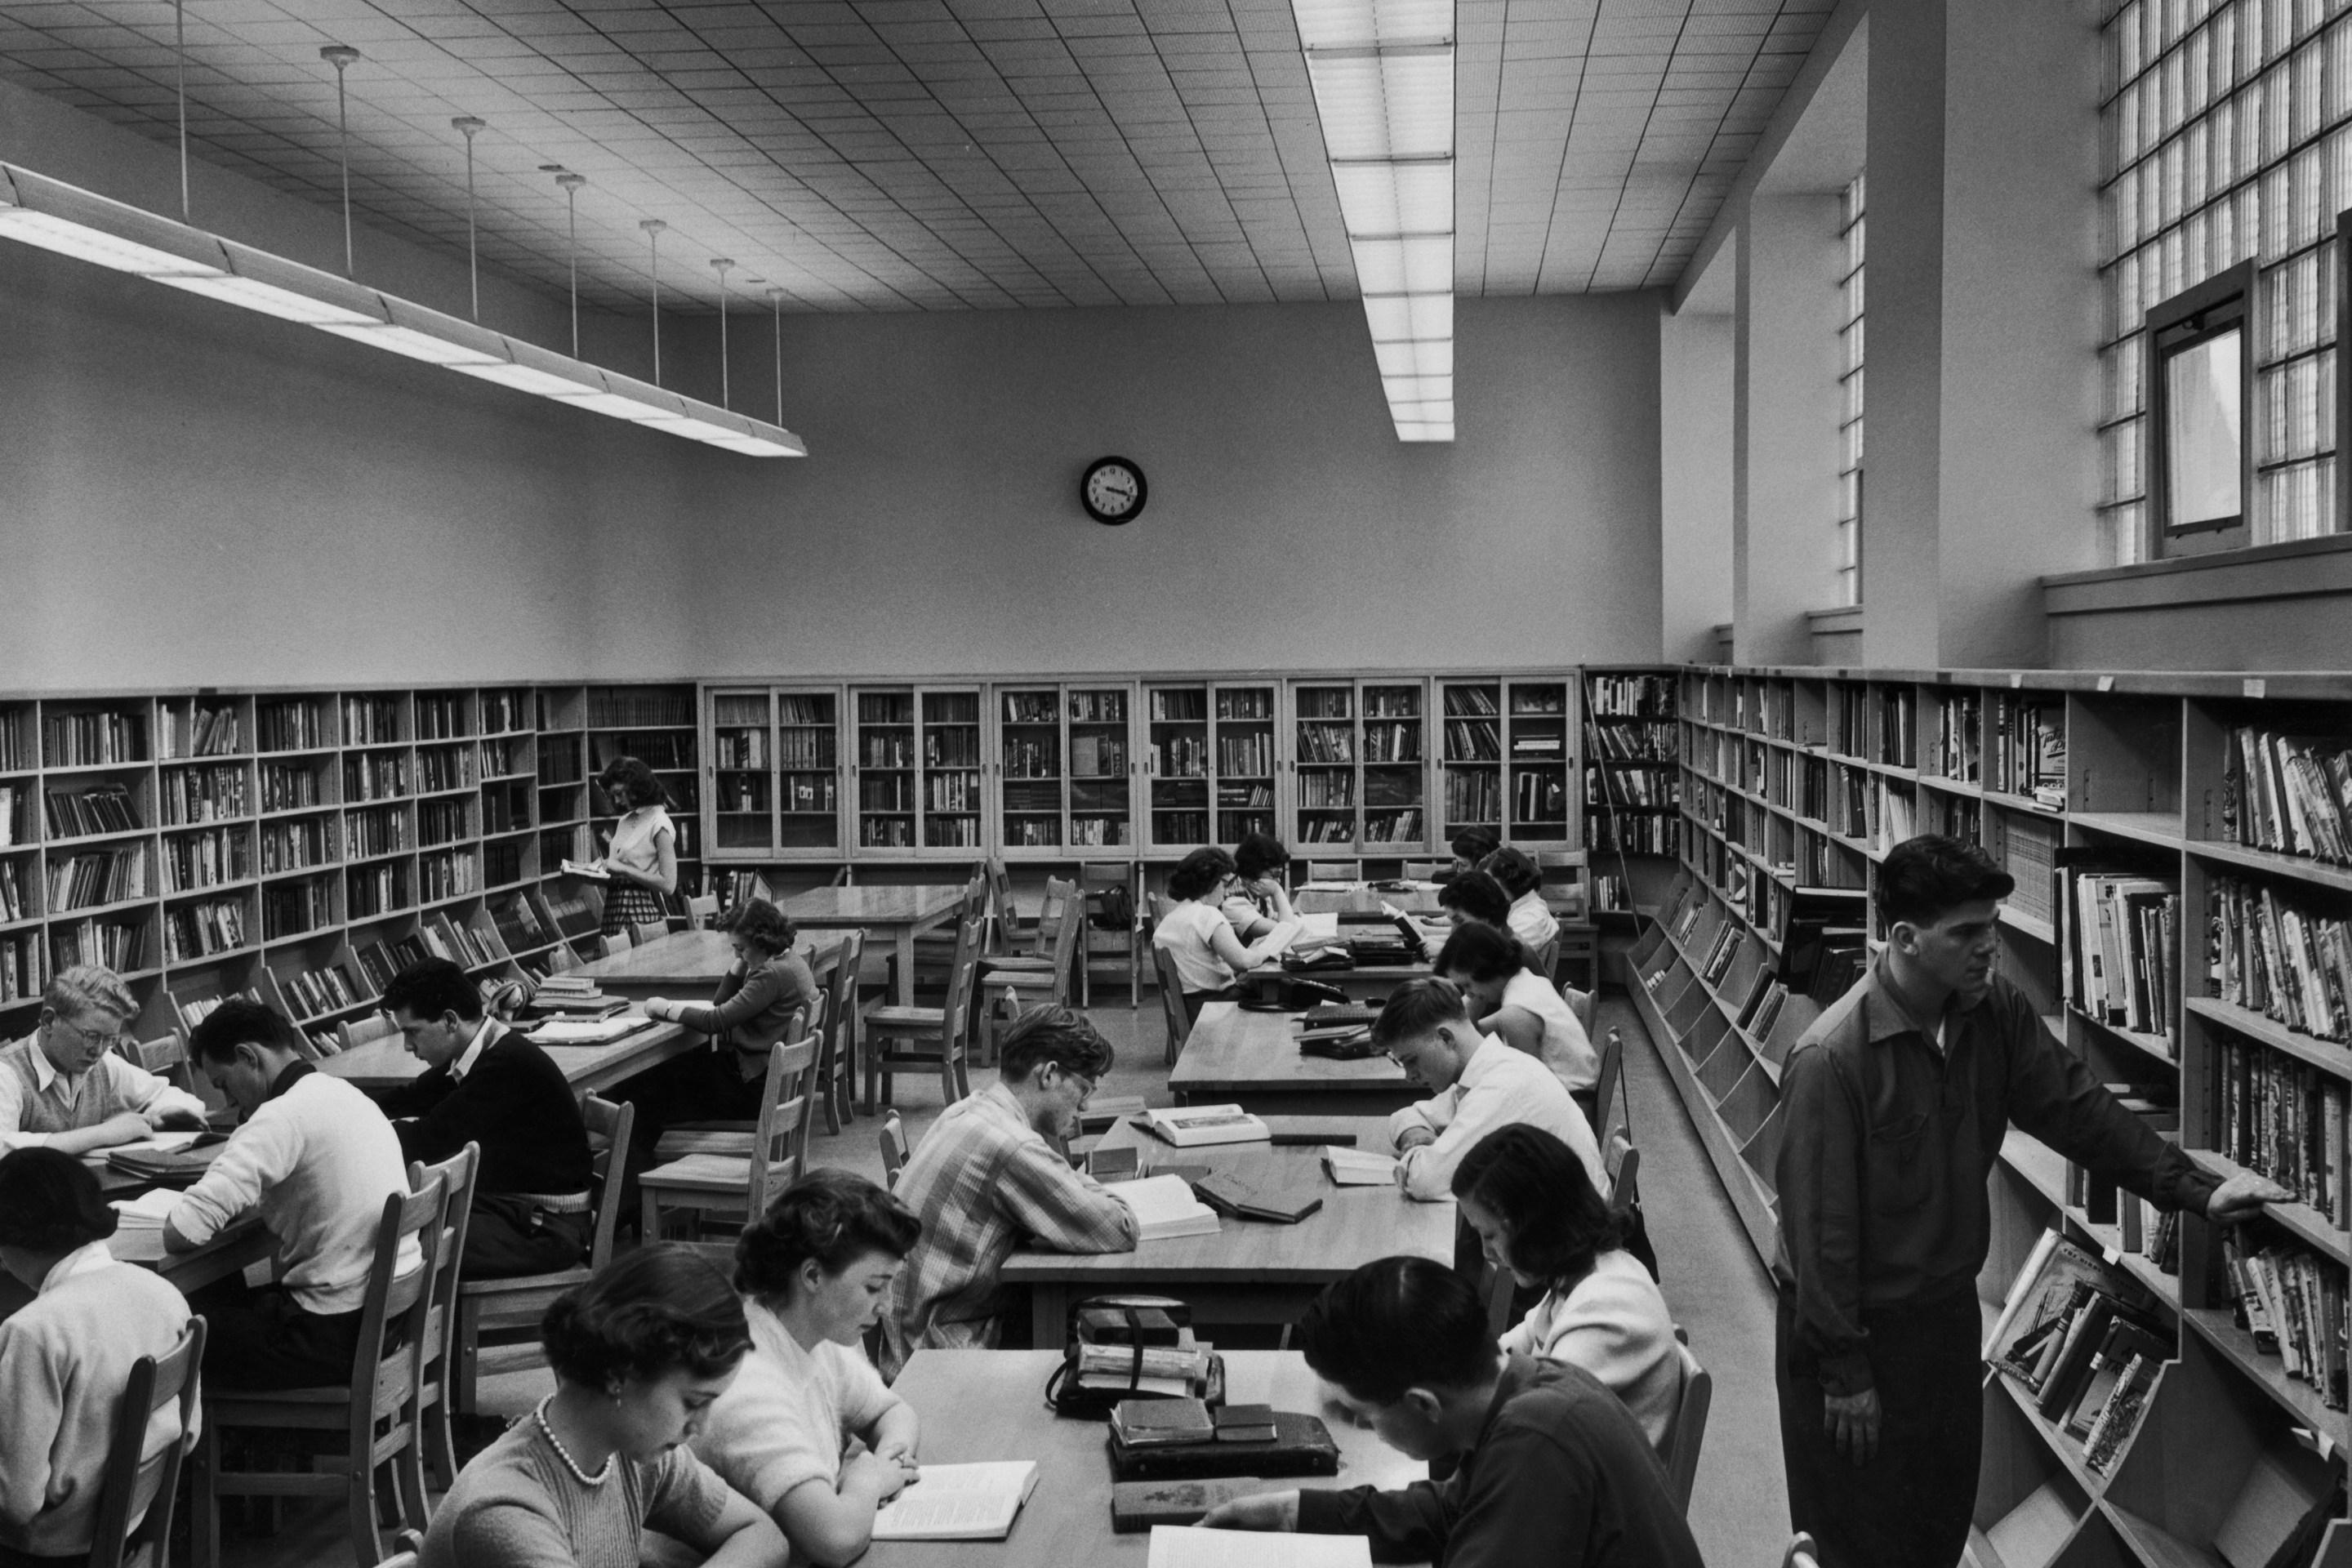 Pupils in the library at Fisher Park High School, Ottawa, circa 1955.